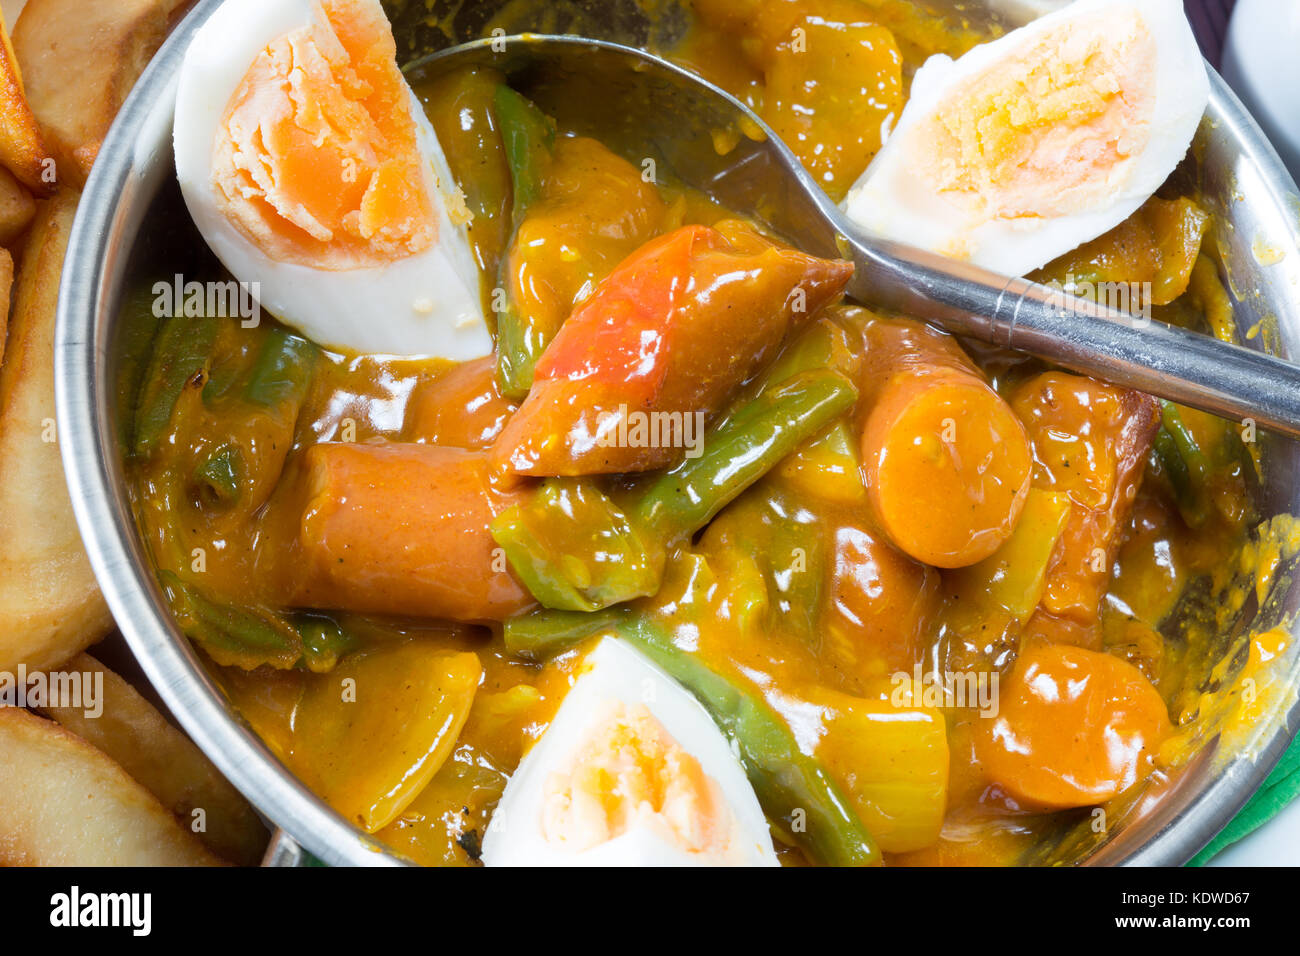 English pub meal of Curried Sausage with boiled egg served in a kahari bowl and a side of potato chips/fries Stock Photo